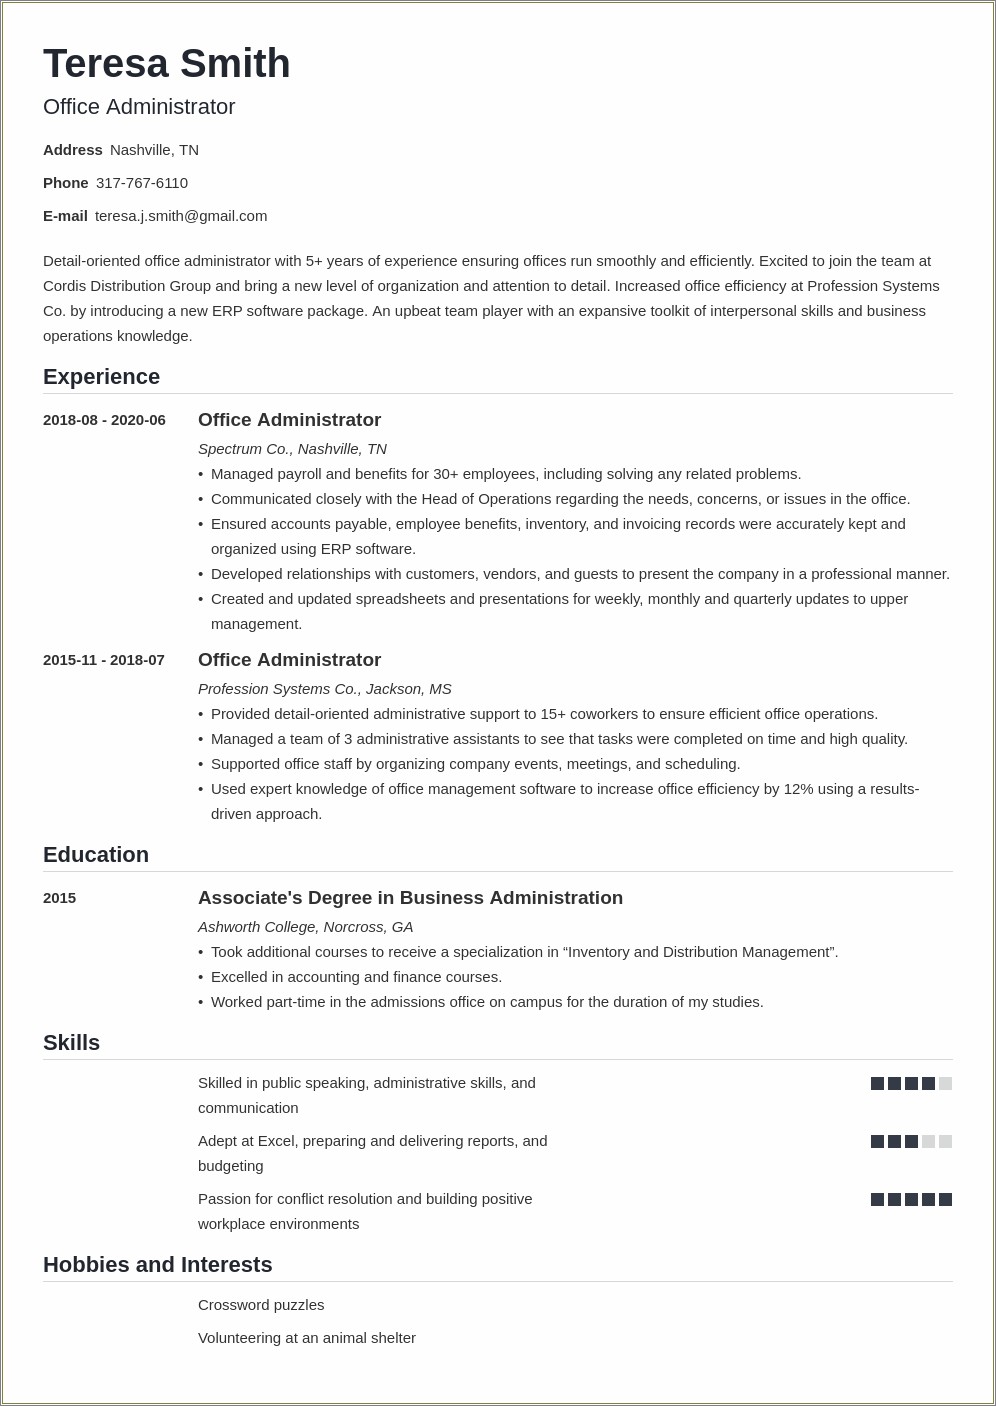 Objective Resume Examples With Communication And Organization